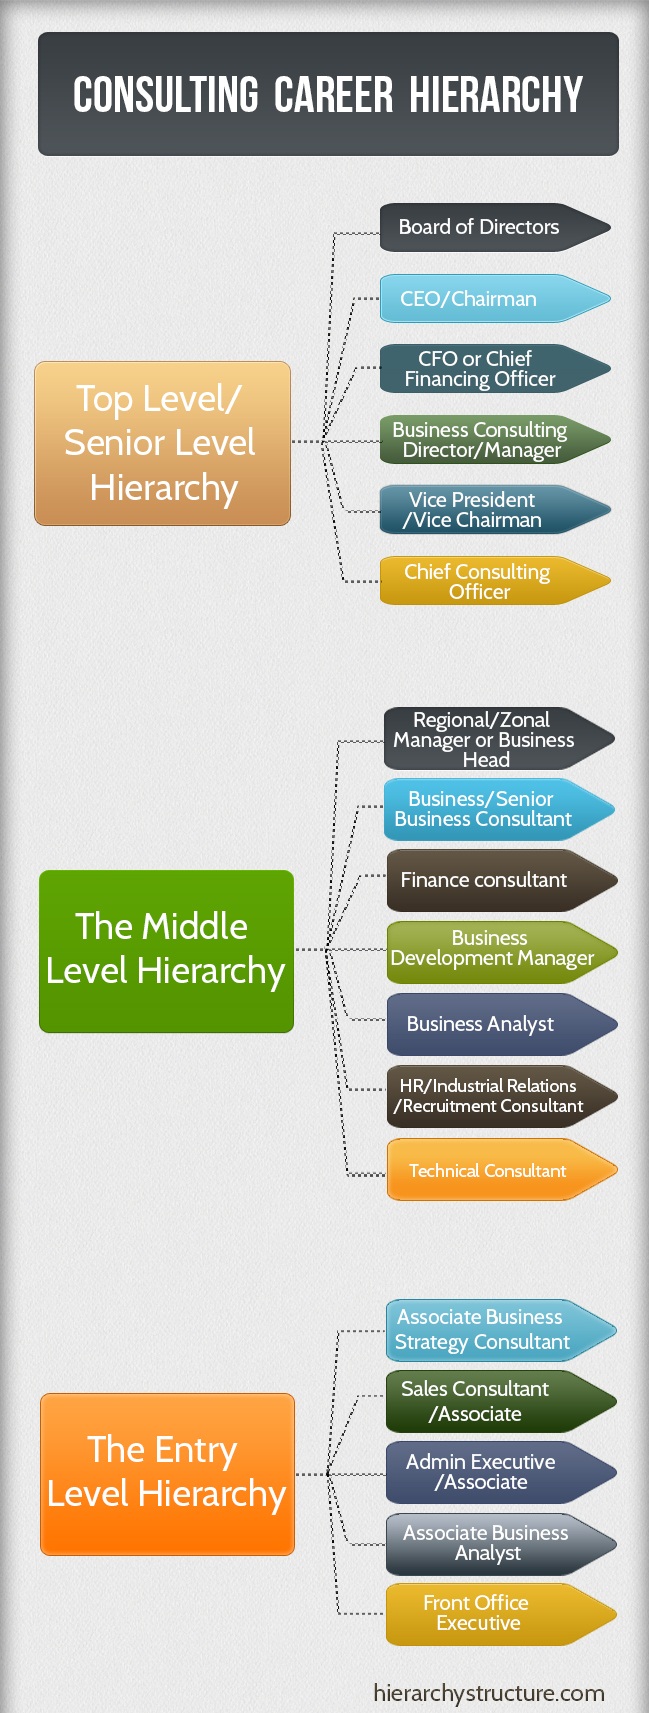 Consulting Career Hierarchy